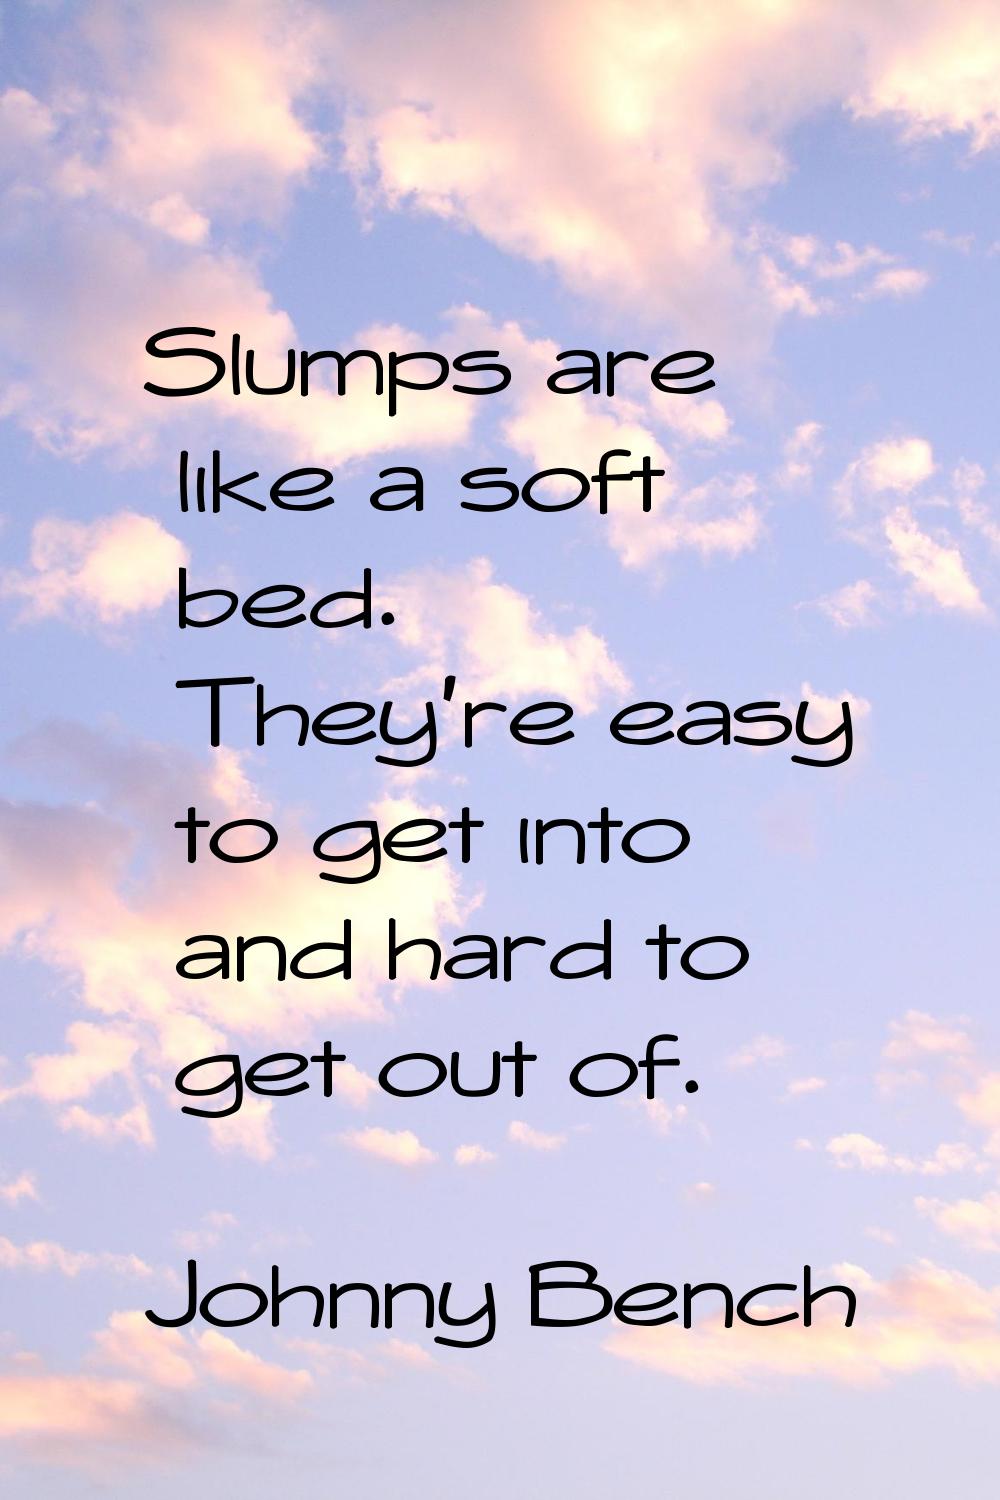 Slumps are like a soft bed. They're easy to get into and hard to get out of.